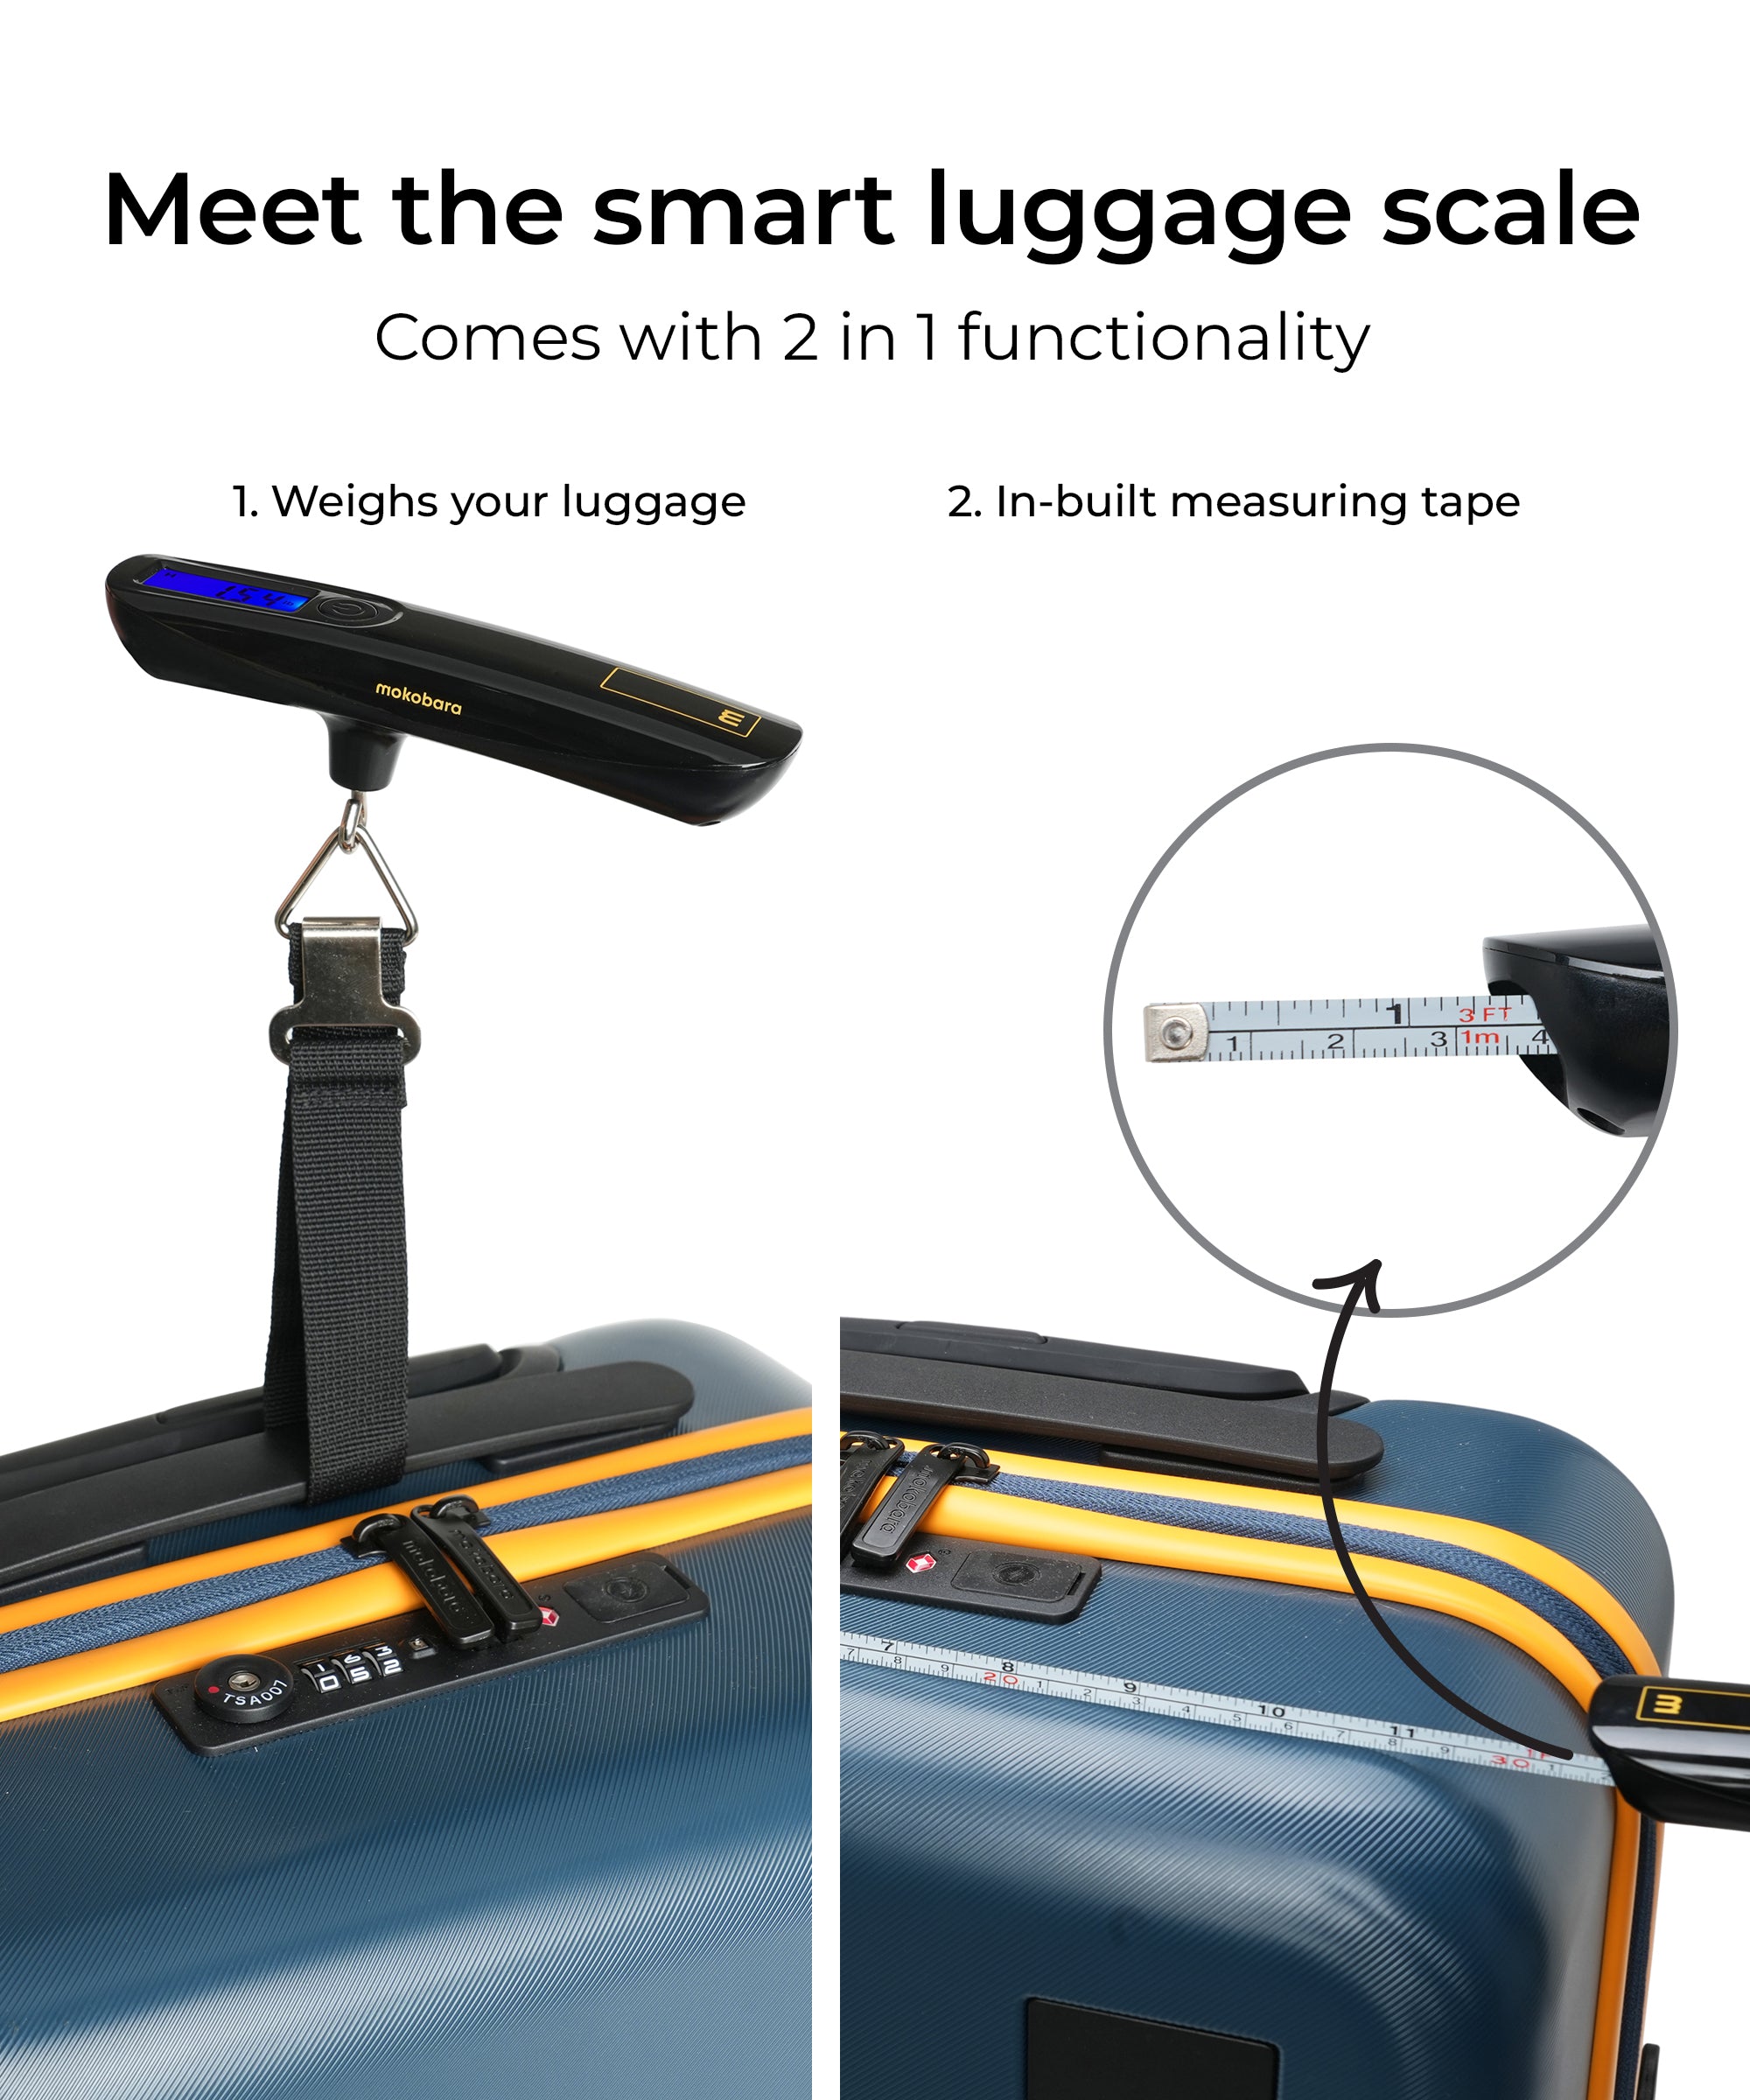 The Luggage Scale